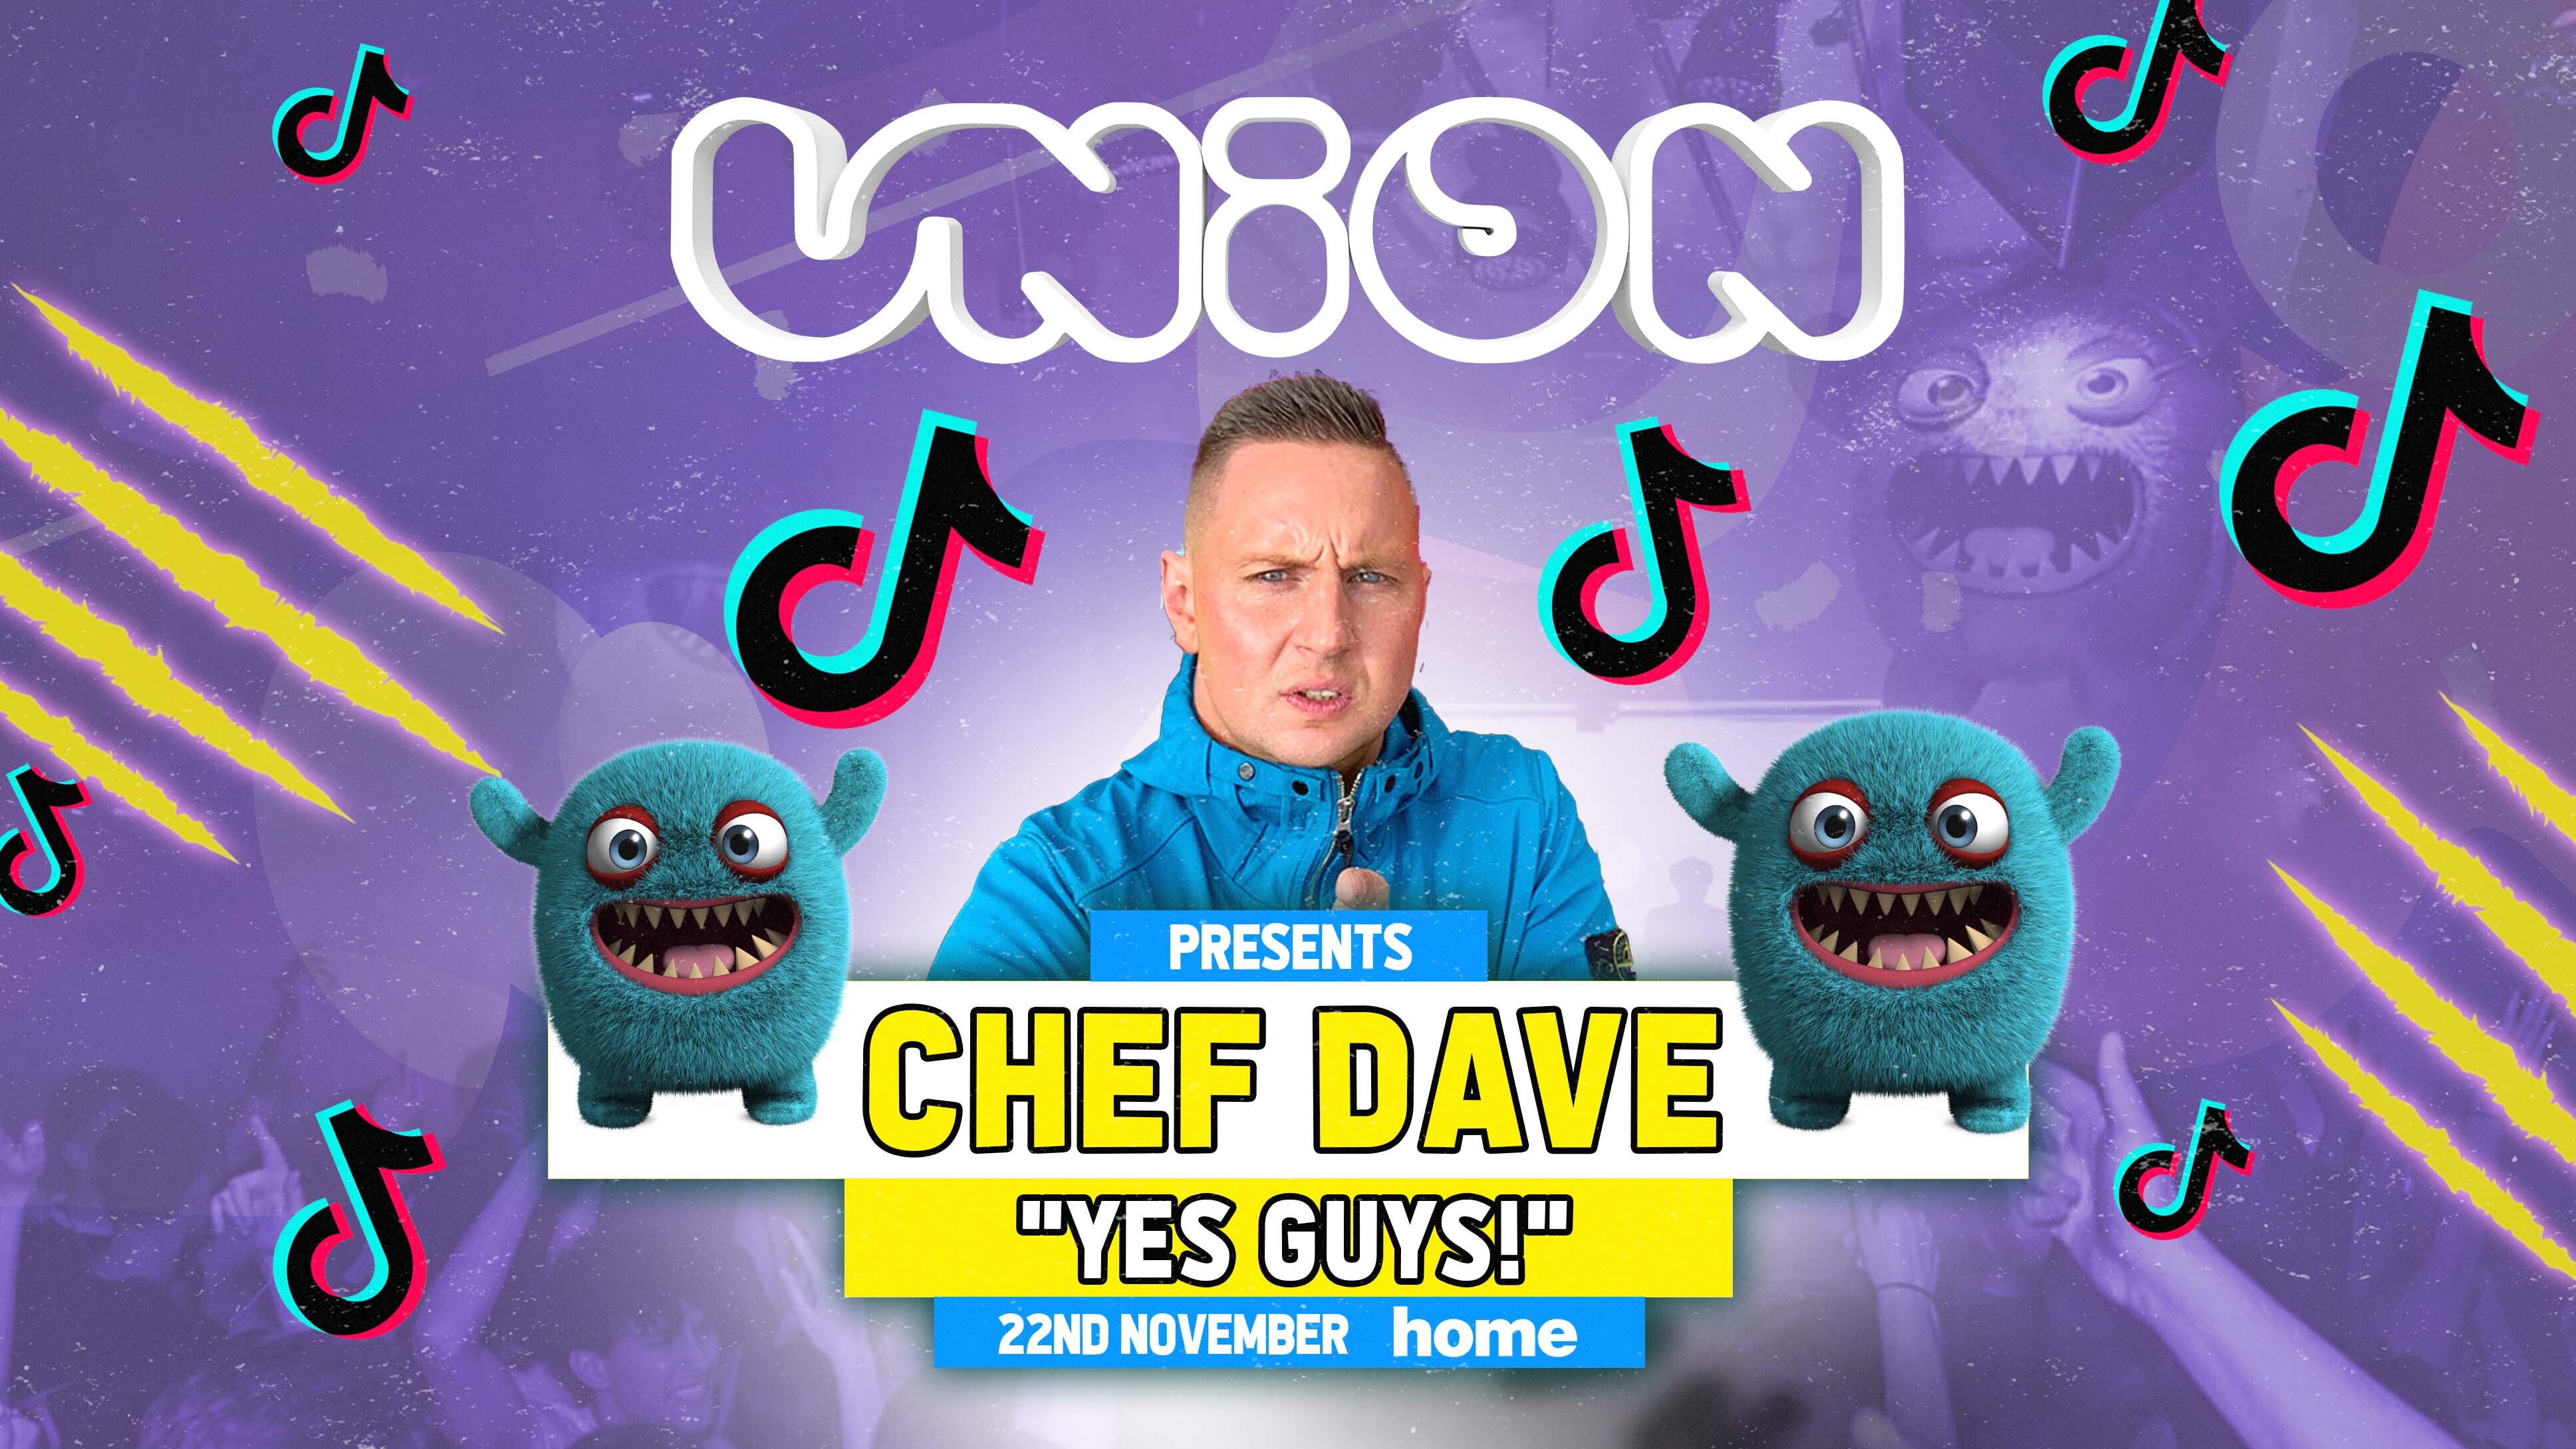 UNION TUESDAY’S PRESENTS CHEF DAVE